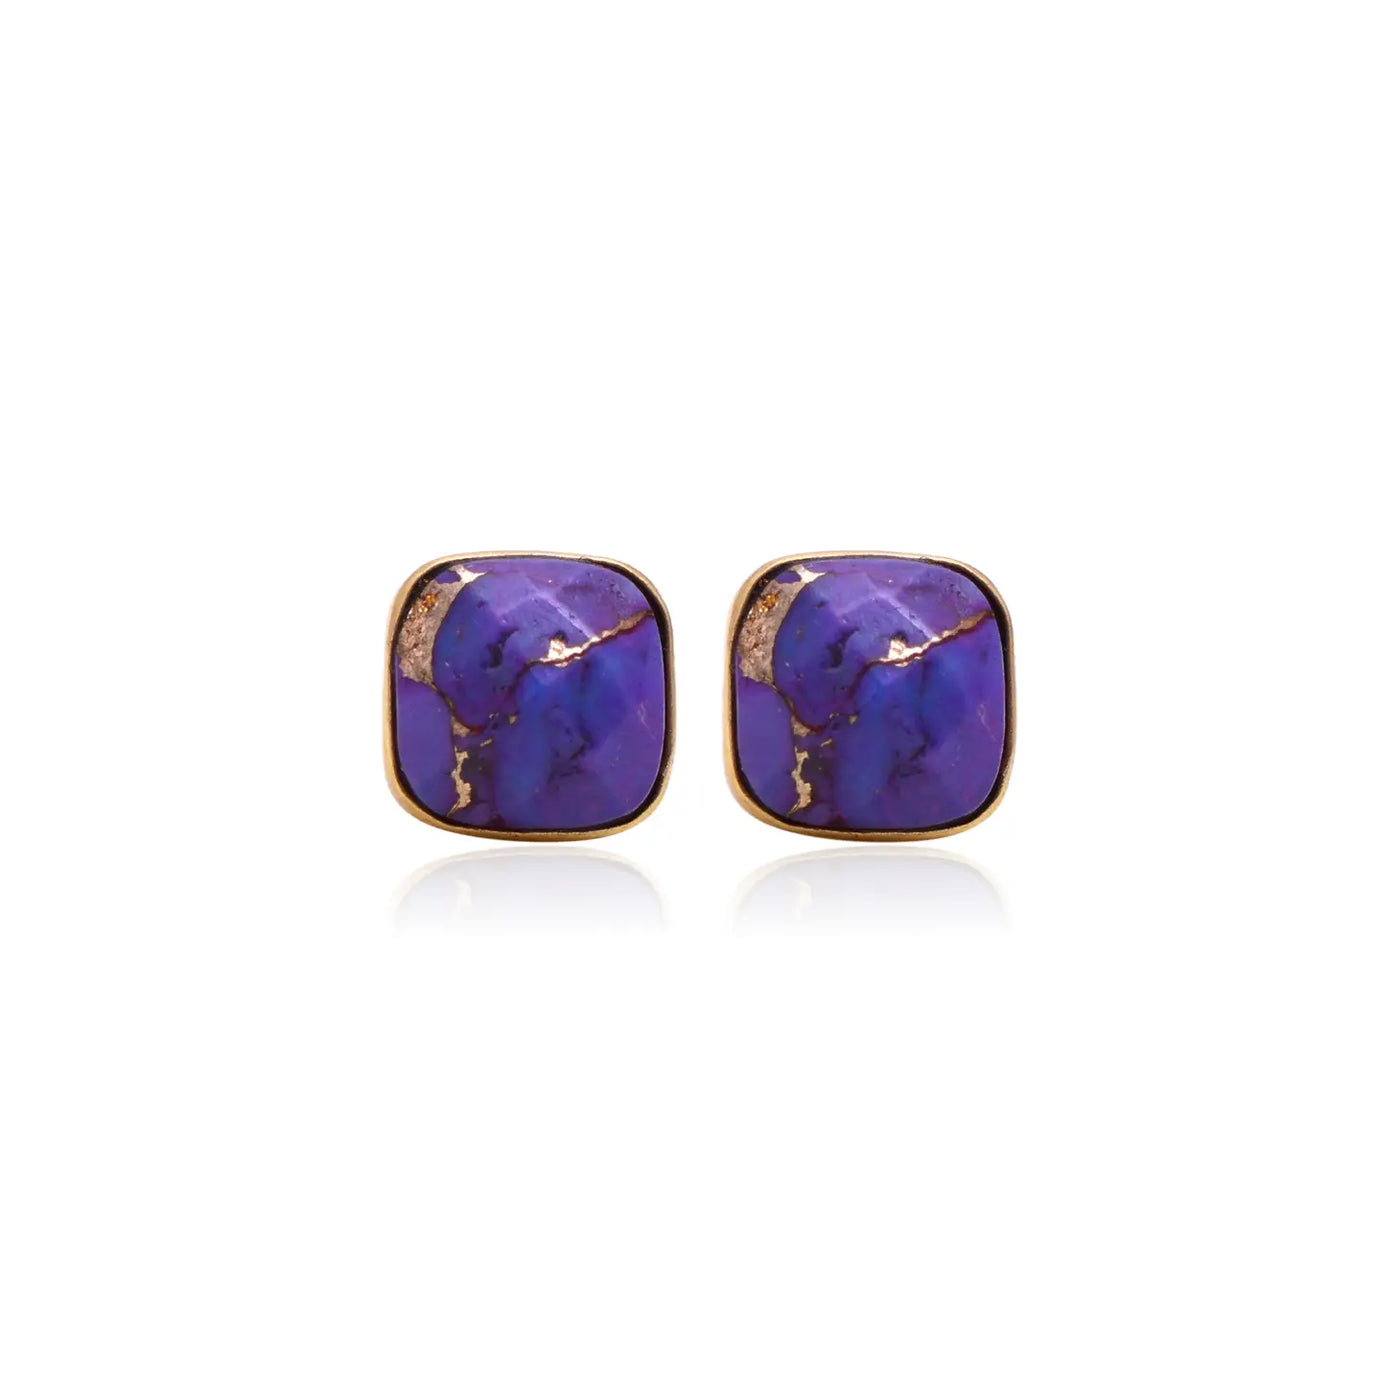 Mohave Cushion Studs